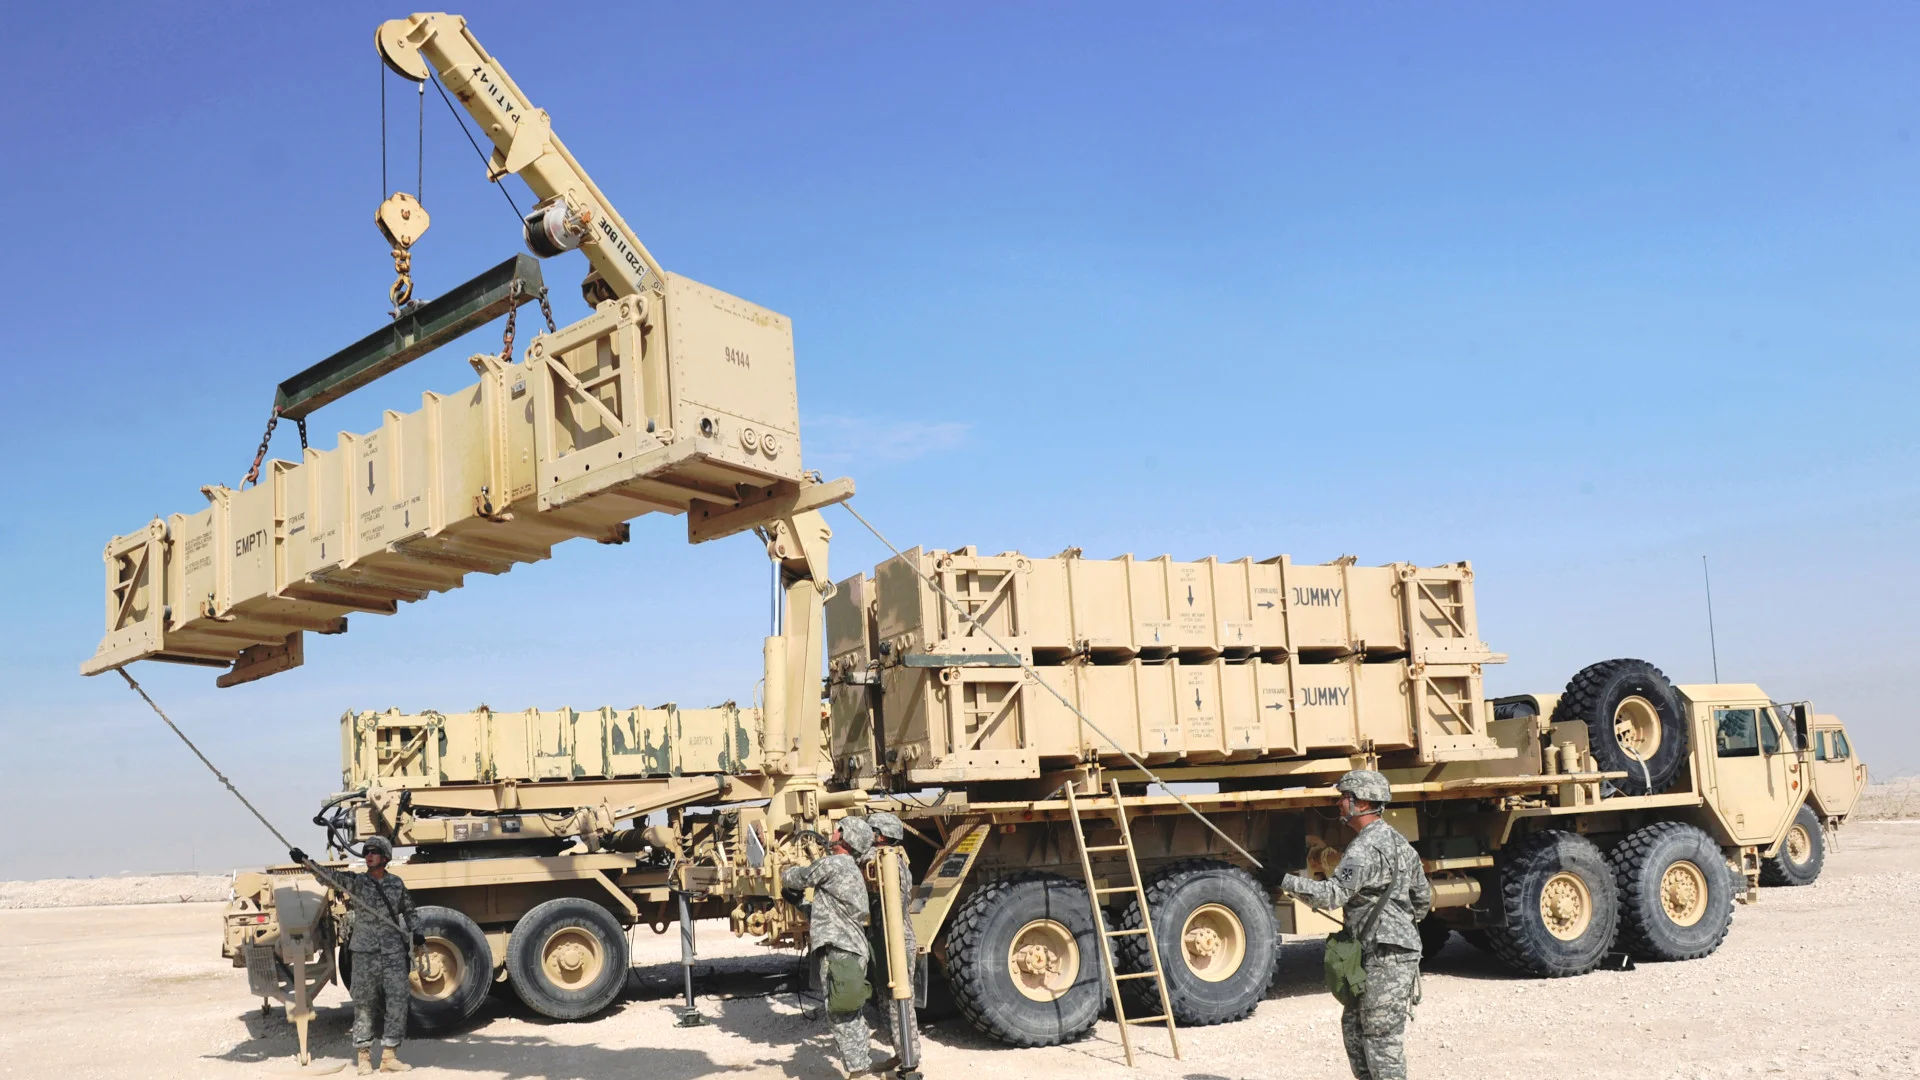 Image about Rafael, Raytheon To Produce New Patriot Missile Systems